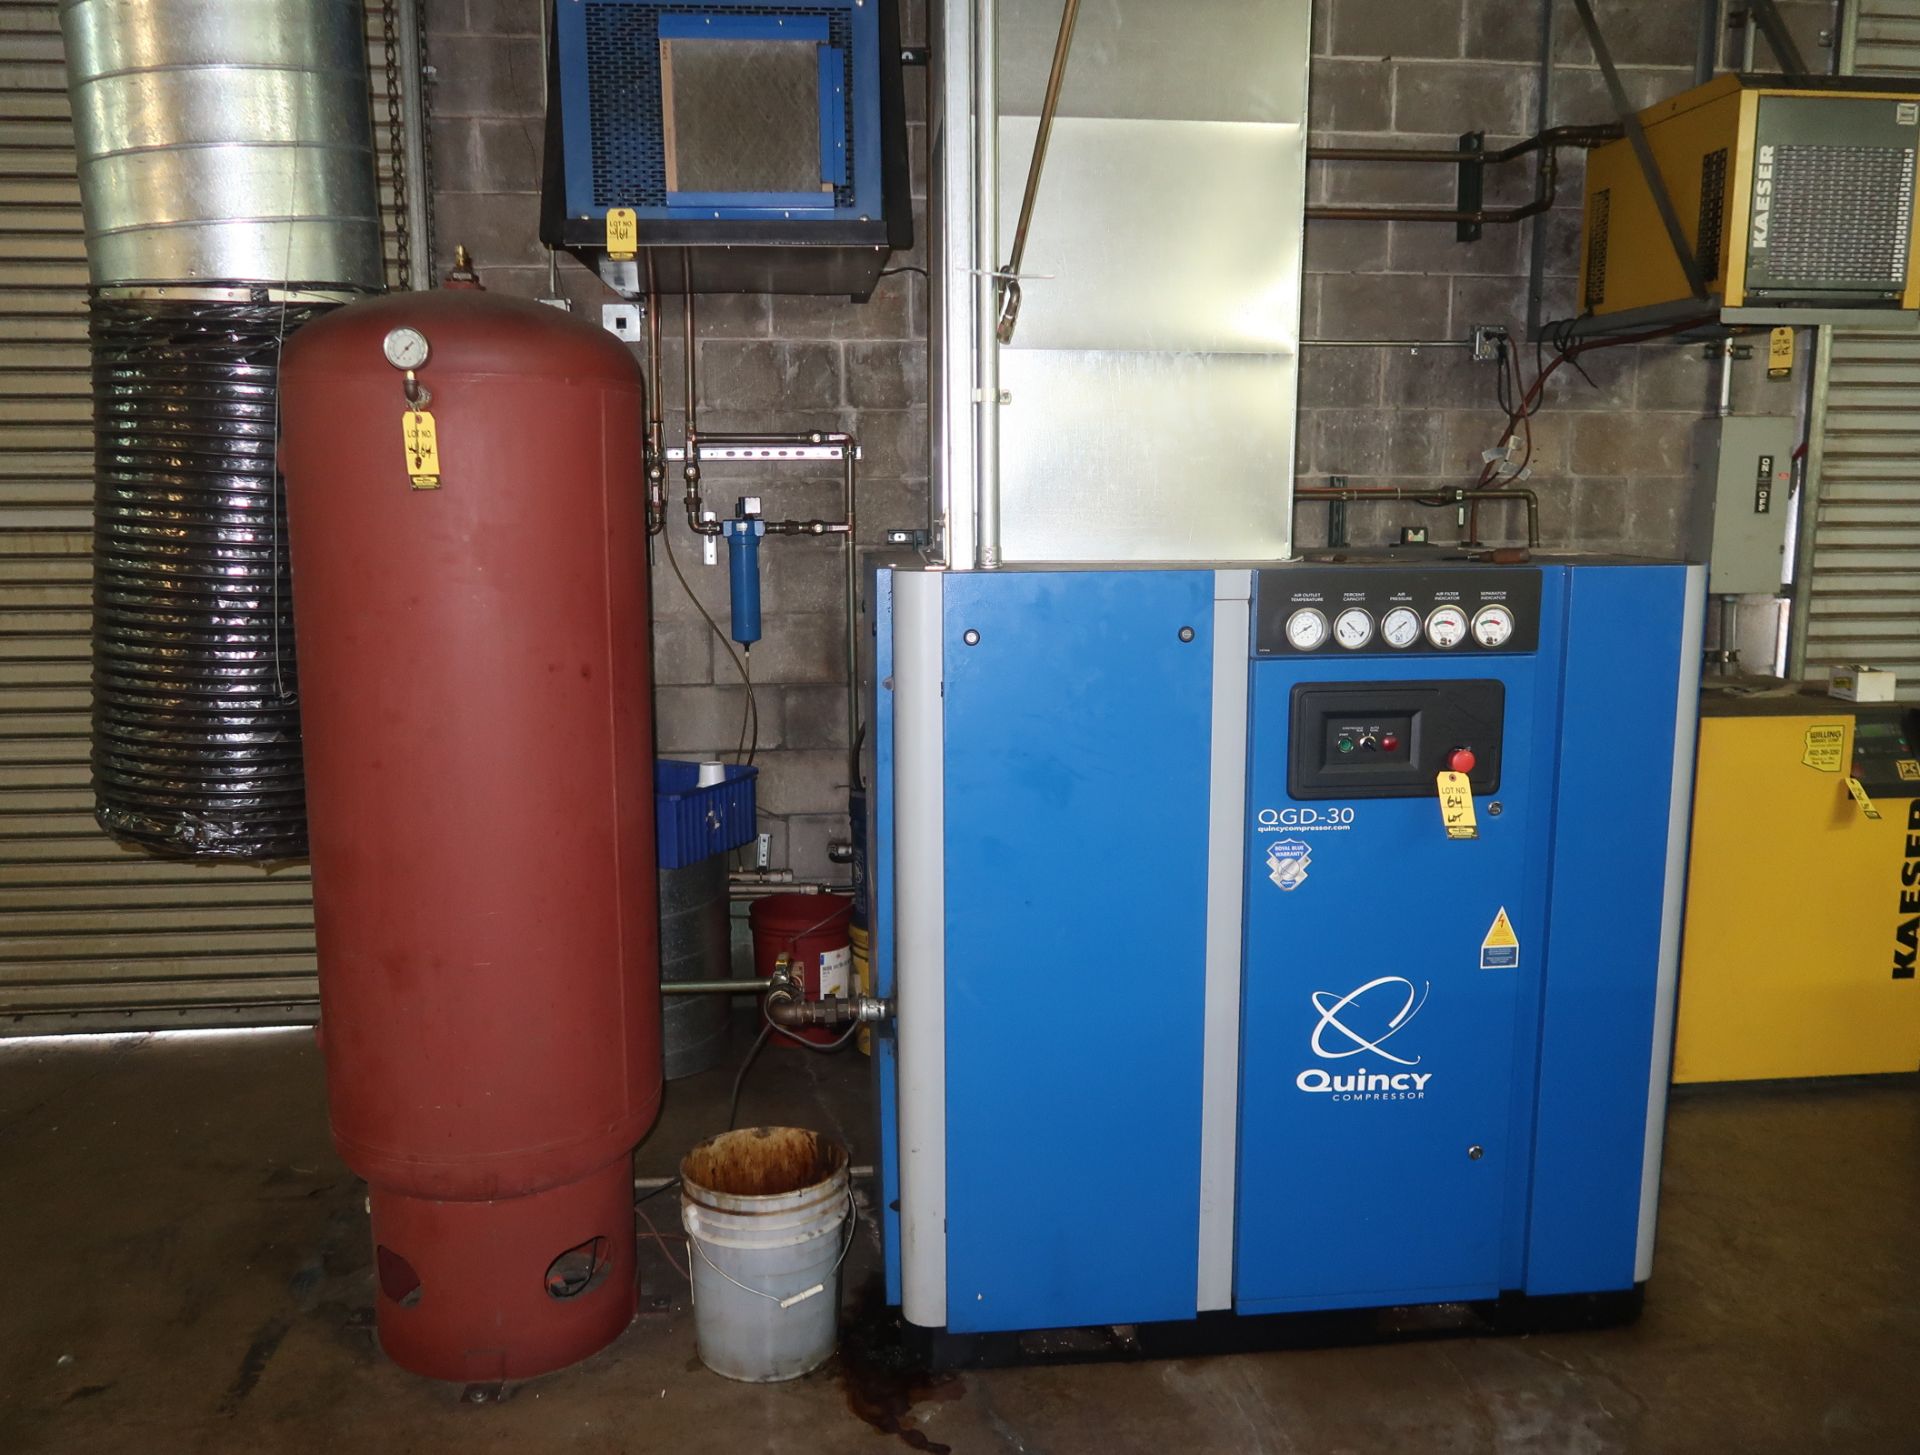 2010 QUINCY QGD-30 ROTARY SCREW AIR COMPRESSOR W/QUINCY DRYER AND HORIZONTAL AIR RECEIVER. 48,785